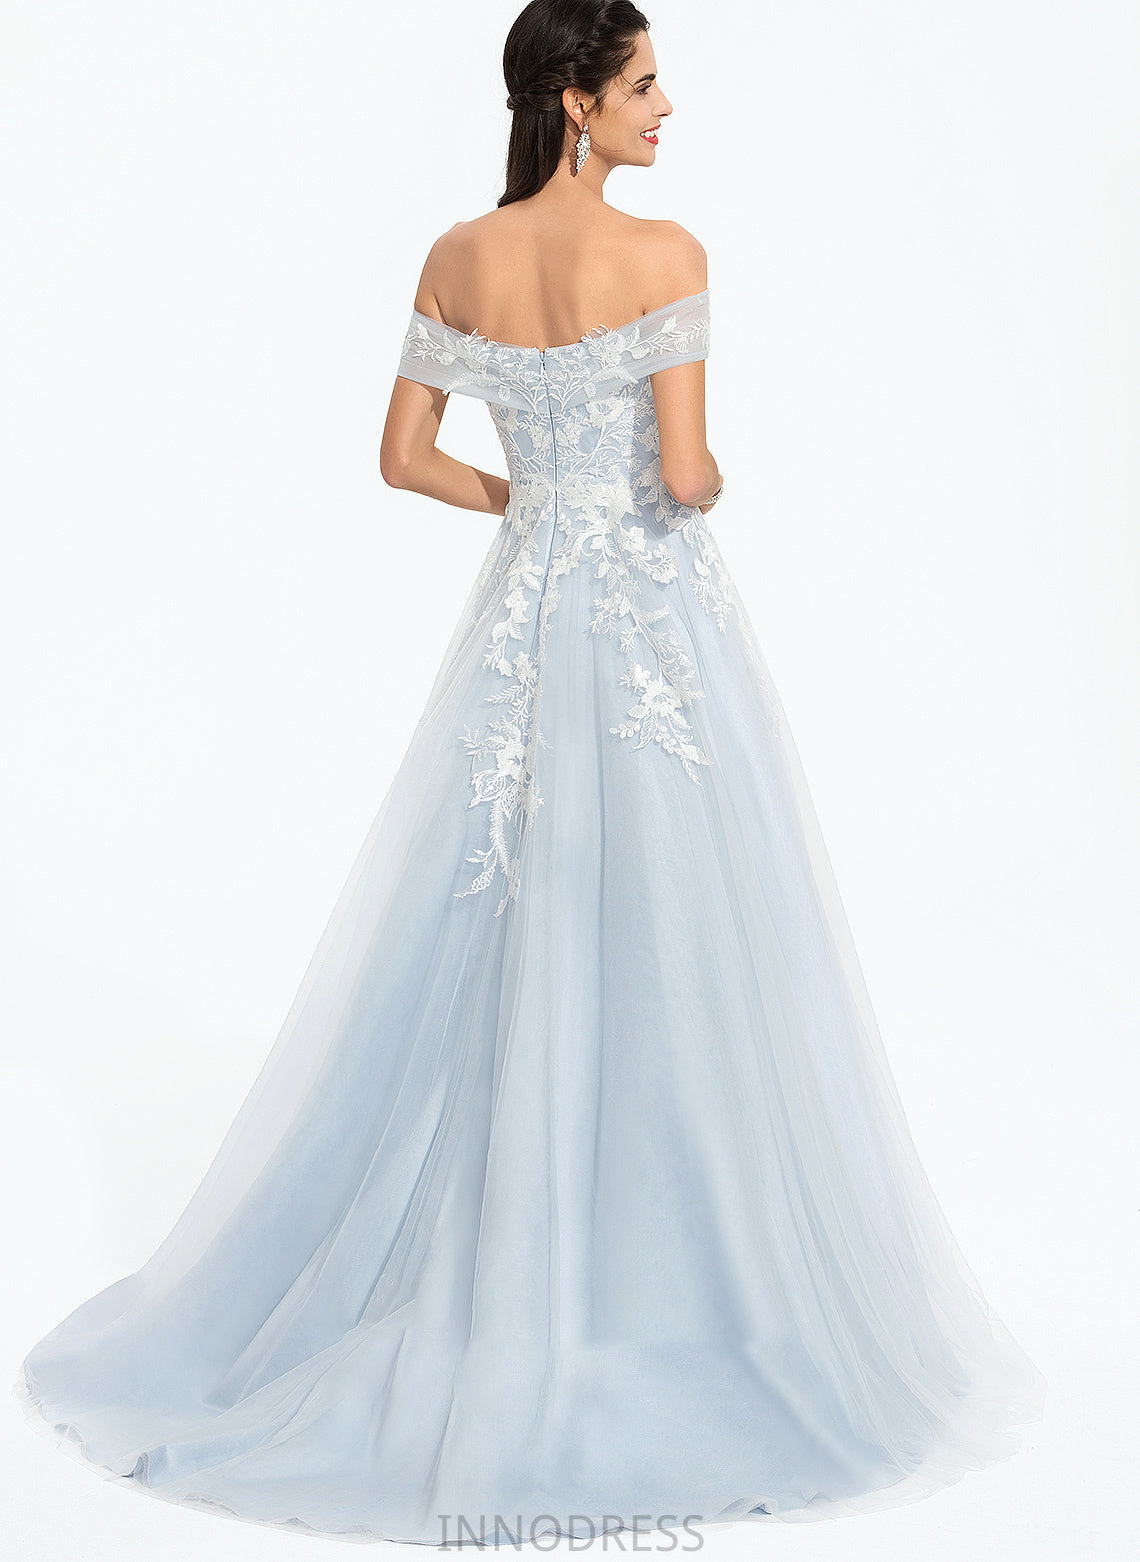 Off-the-Shoulder Sweep Prom Dresses With Sequins Train Ball-Gown/Princess Virginia Tulle